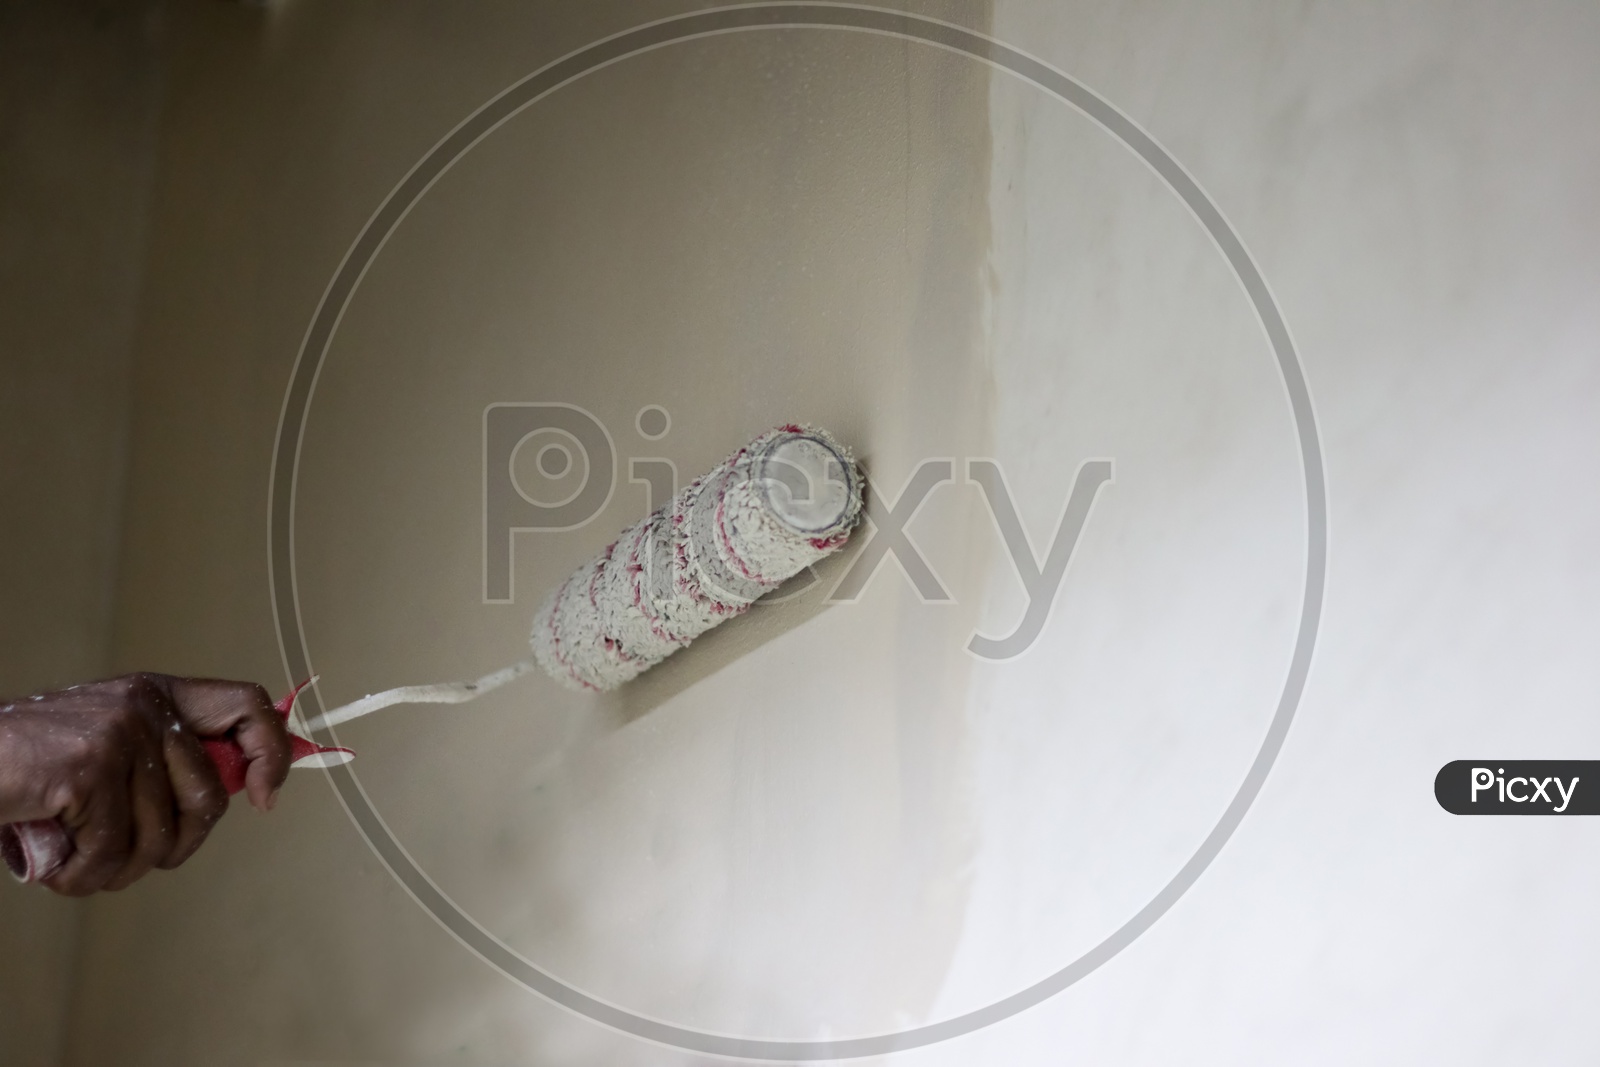 A canvas roller brush for painting walls